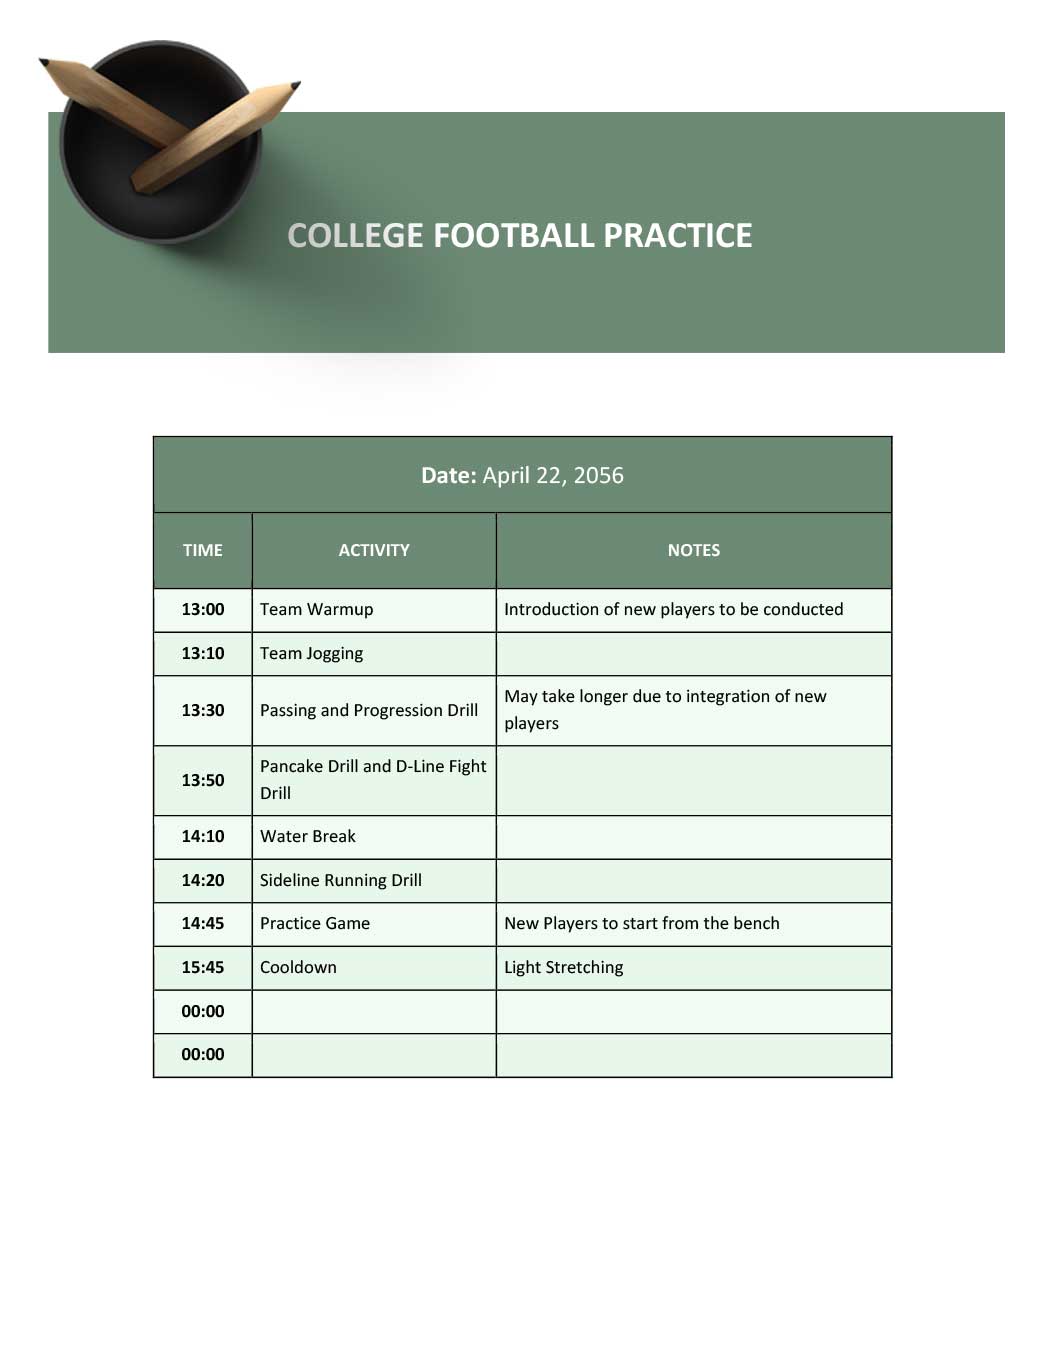 College Football Practice Schedule Template in Word, Google Docs, Pages